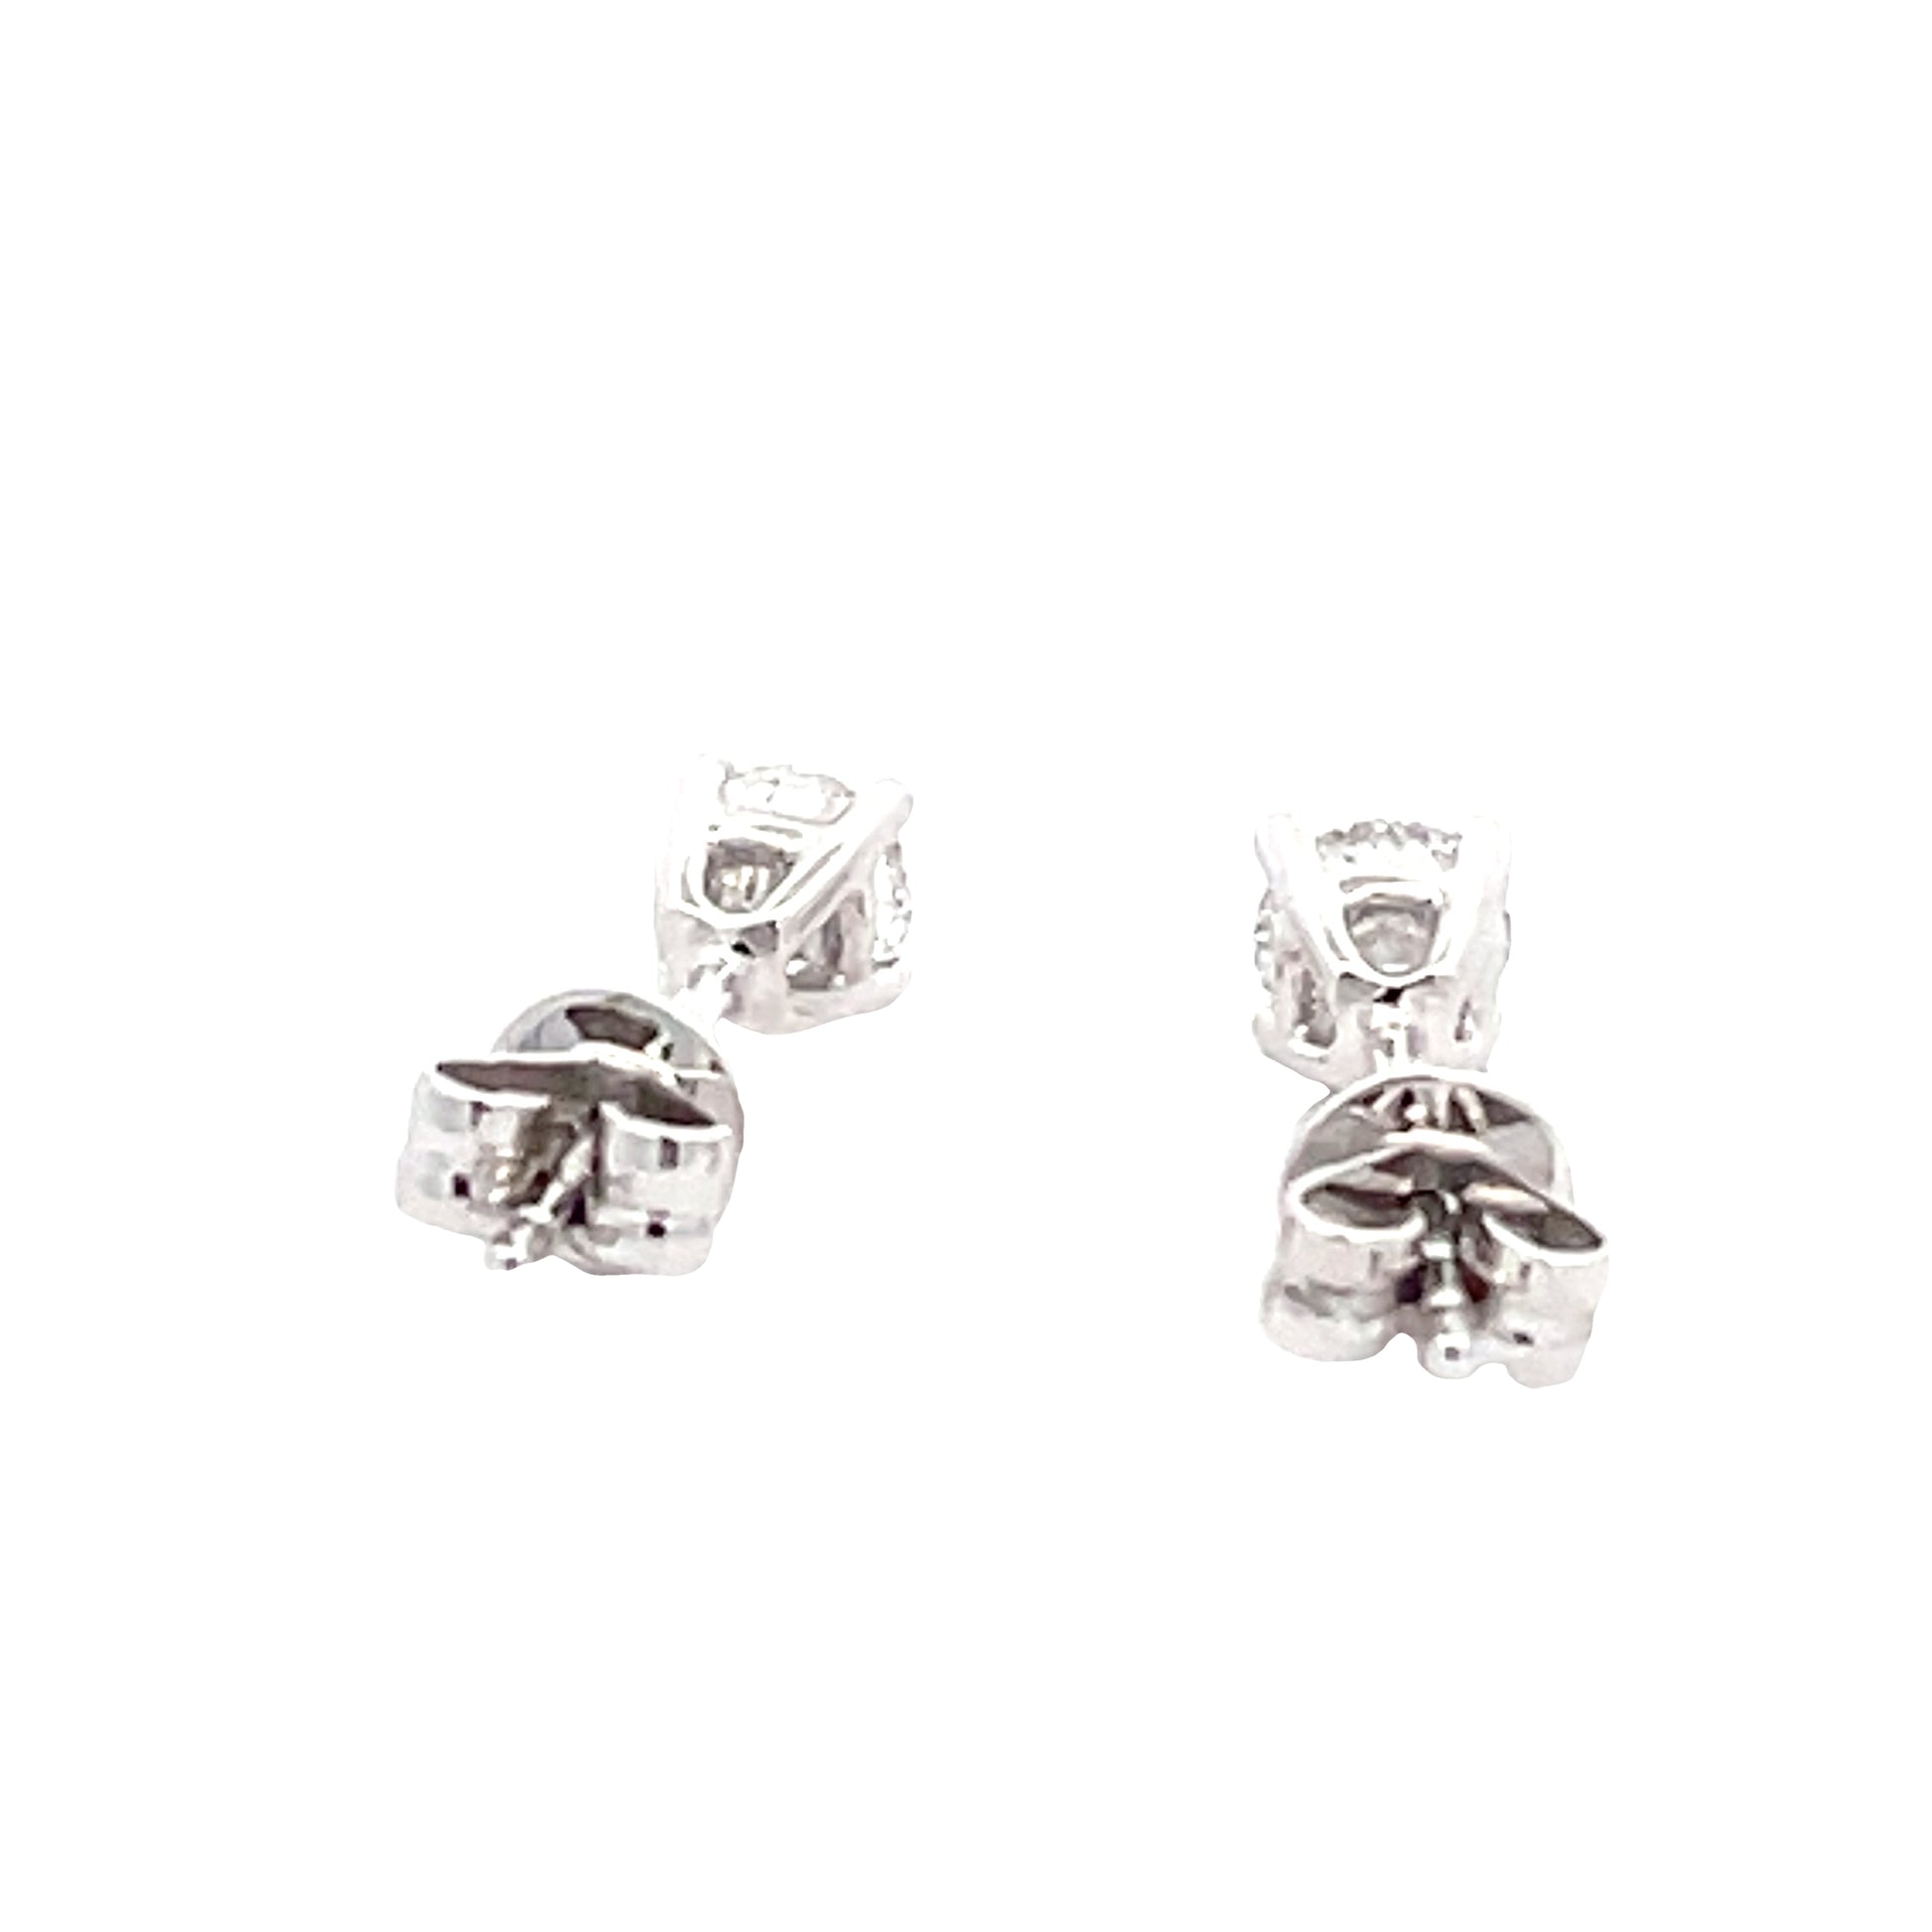 Lab Grown Round Brilliant Cut Diamond Solitaire Earrings - 0.50cts  Gardiner Brothers   